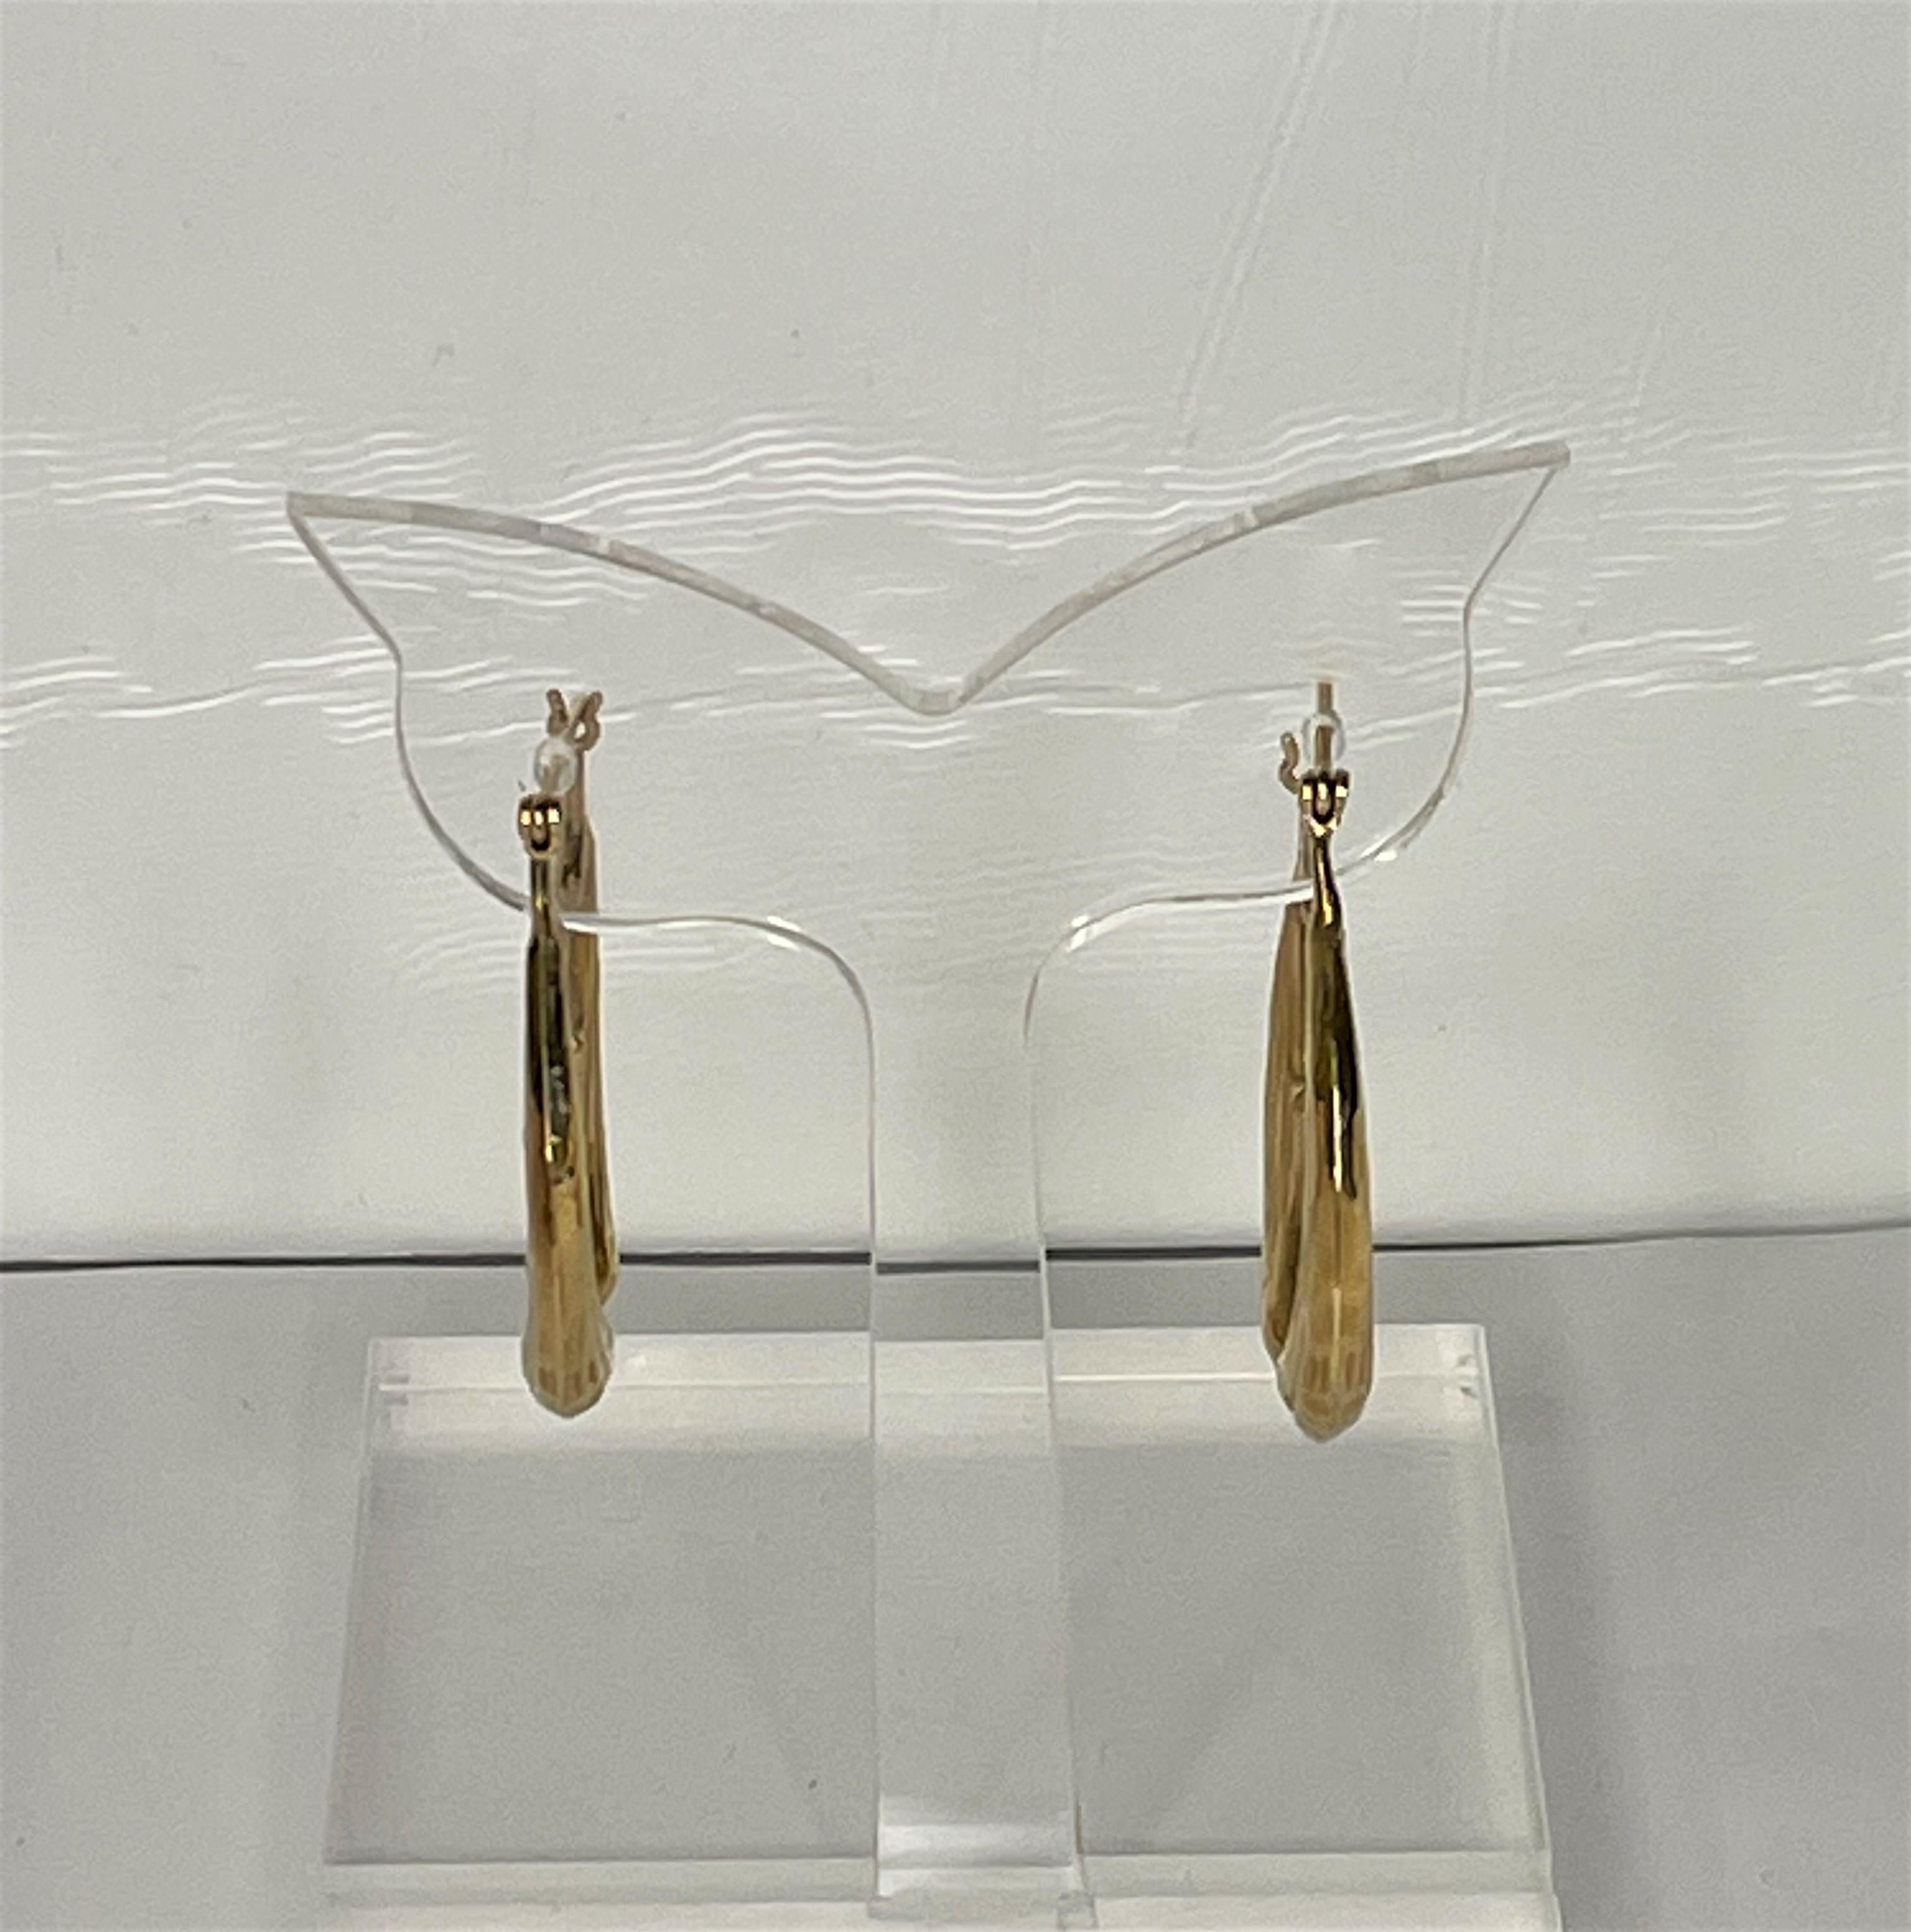 These playful earrings will be a favorite for anyone who likes dophins!
14 karat yellow gold.
Each earring has two dolphins tails up, noses touching a small ball at the bottom of the hoop.
Hinged post.
Approximately 33mm x 27mm
2.4dwt
Stamped 